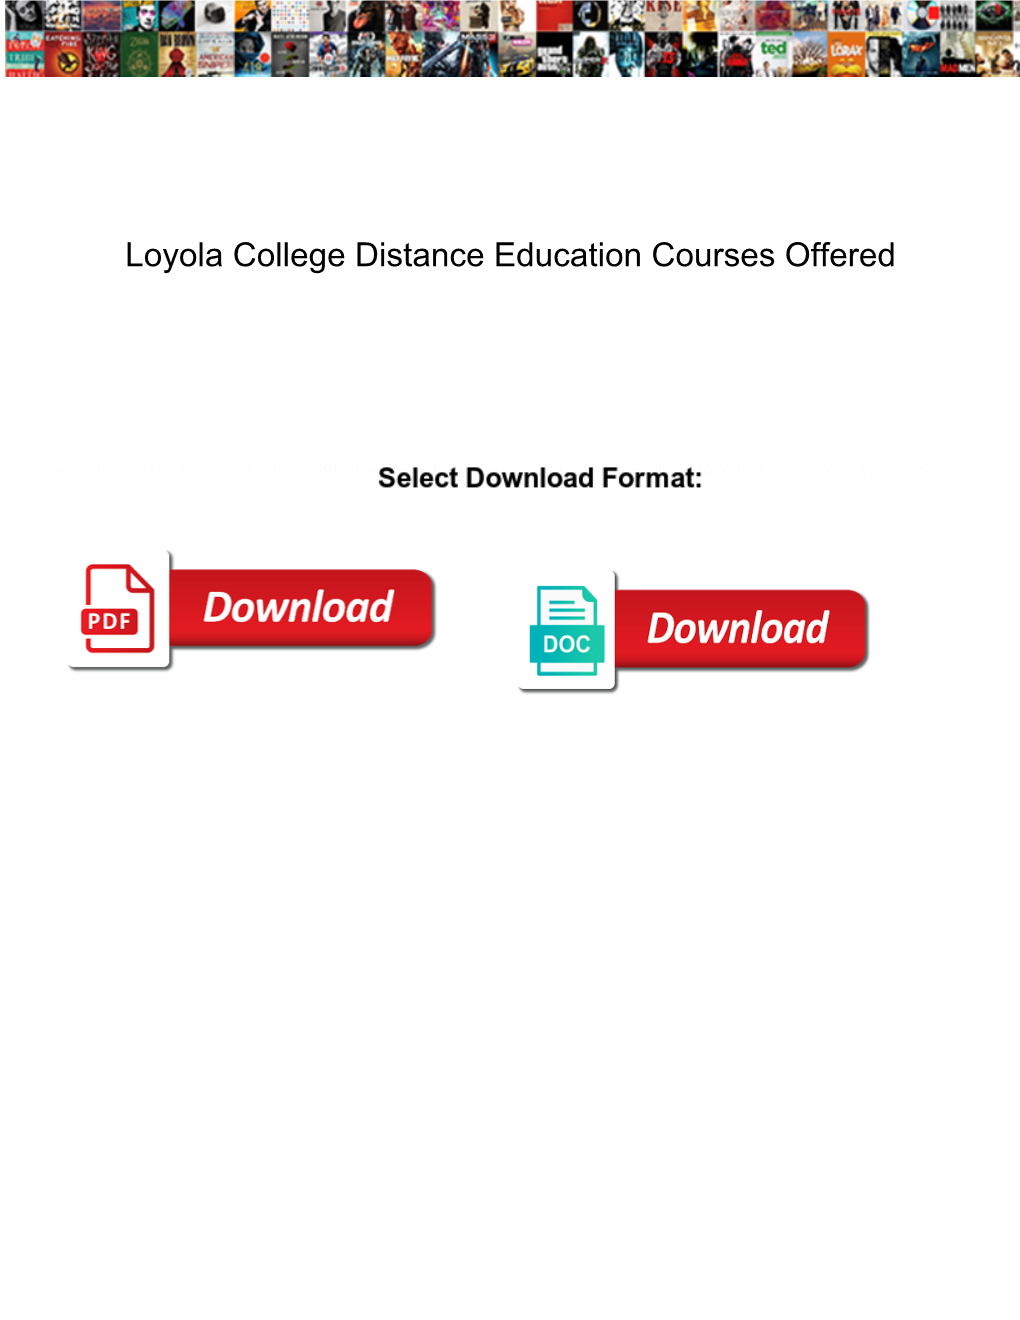 Loyola College Distance Education Courses Offered